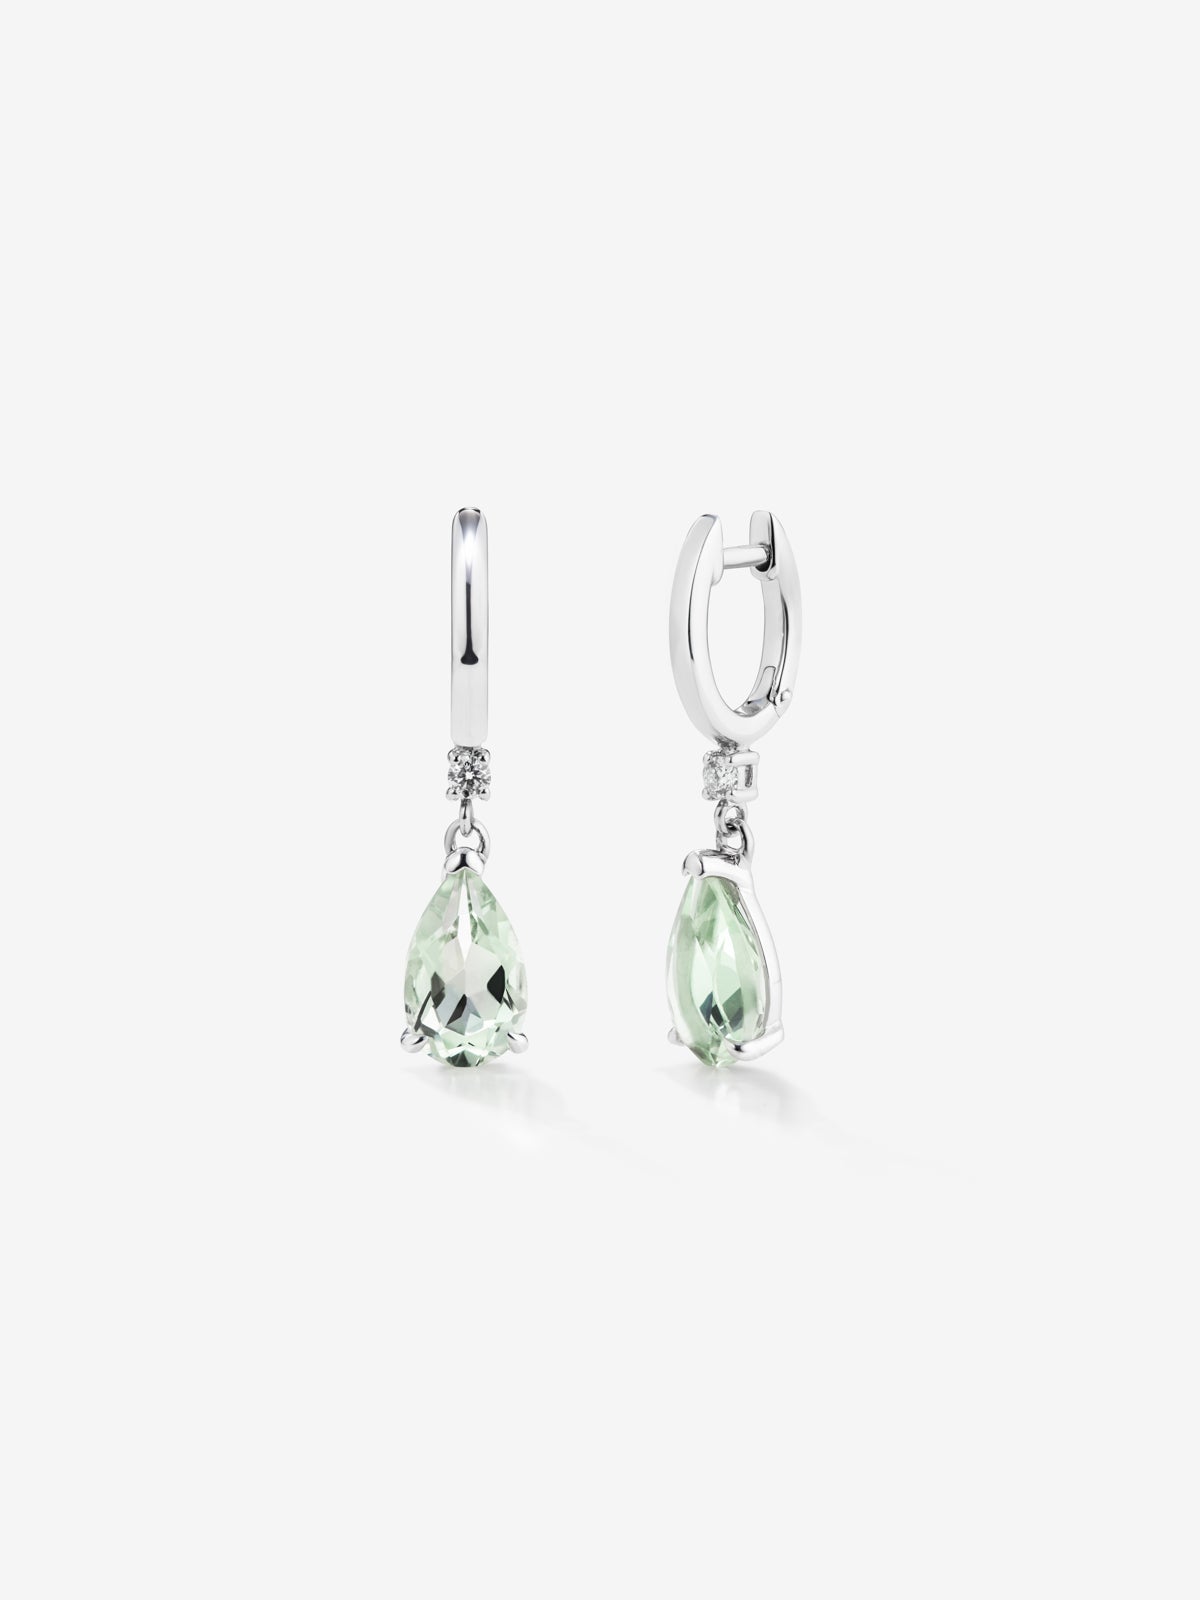 925 Silver hoop earrings with green amethyst and hanging diamond